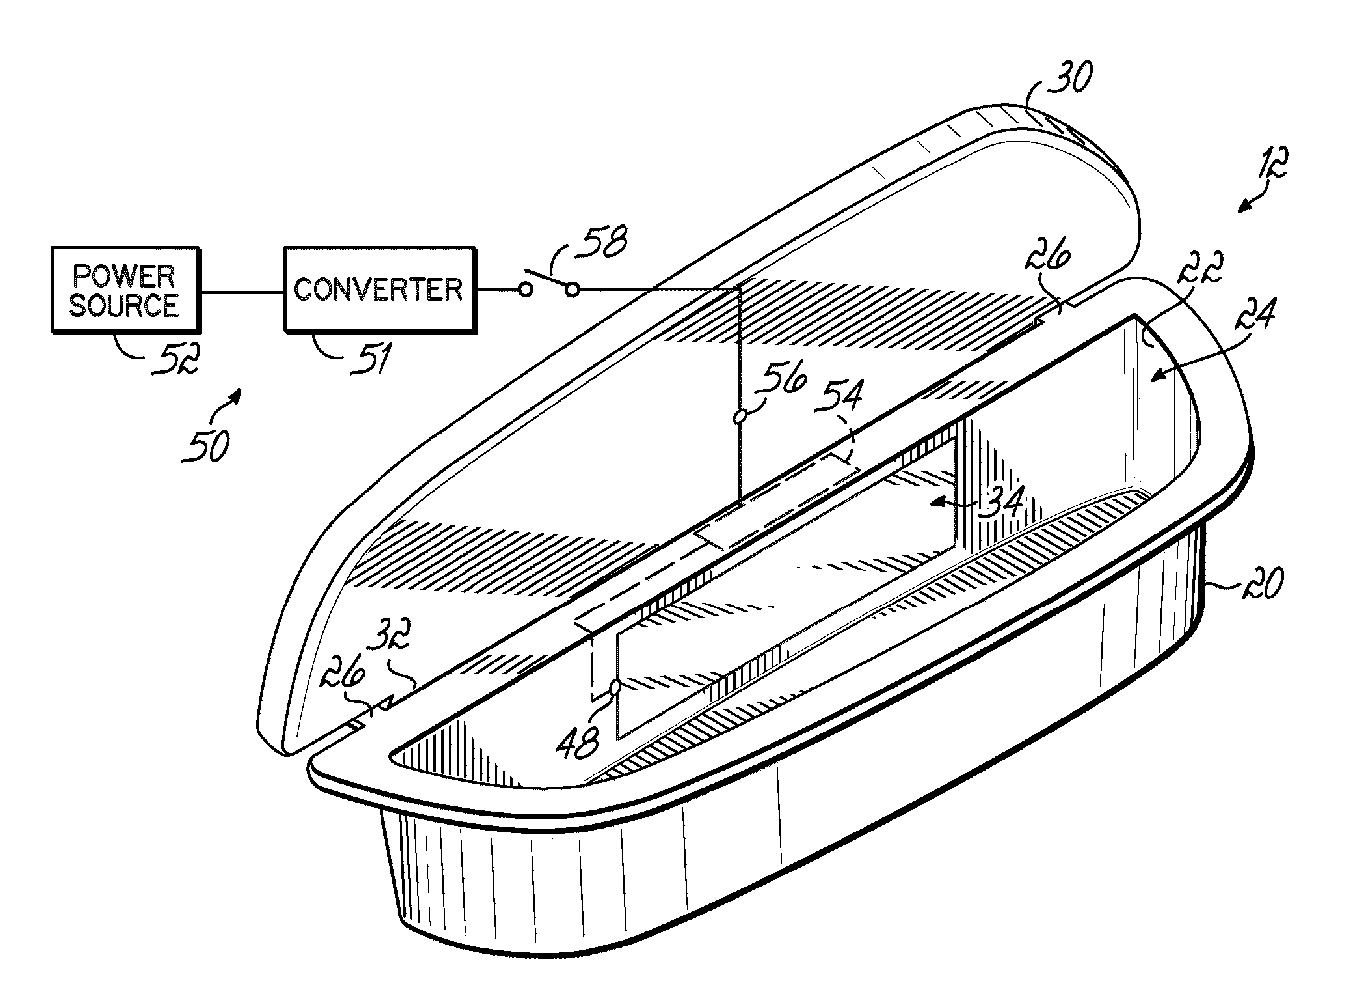 Automotive storage compartment having an electroluminescent lamp and method of making the same